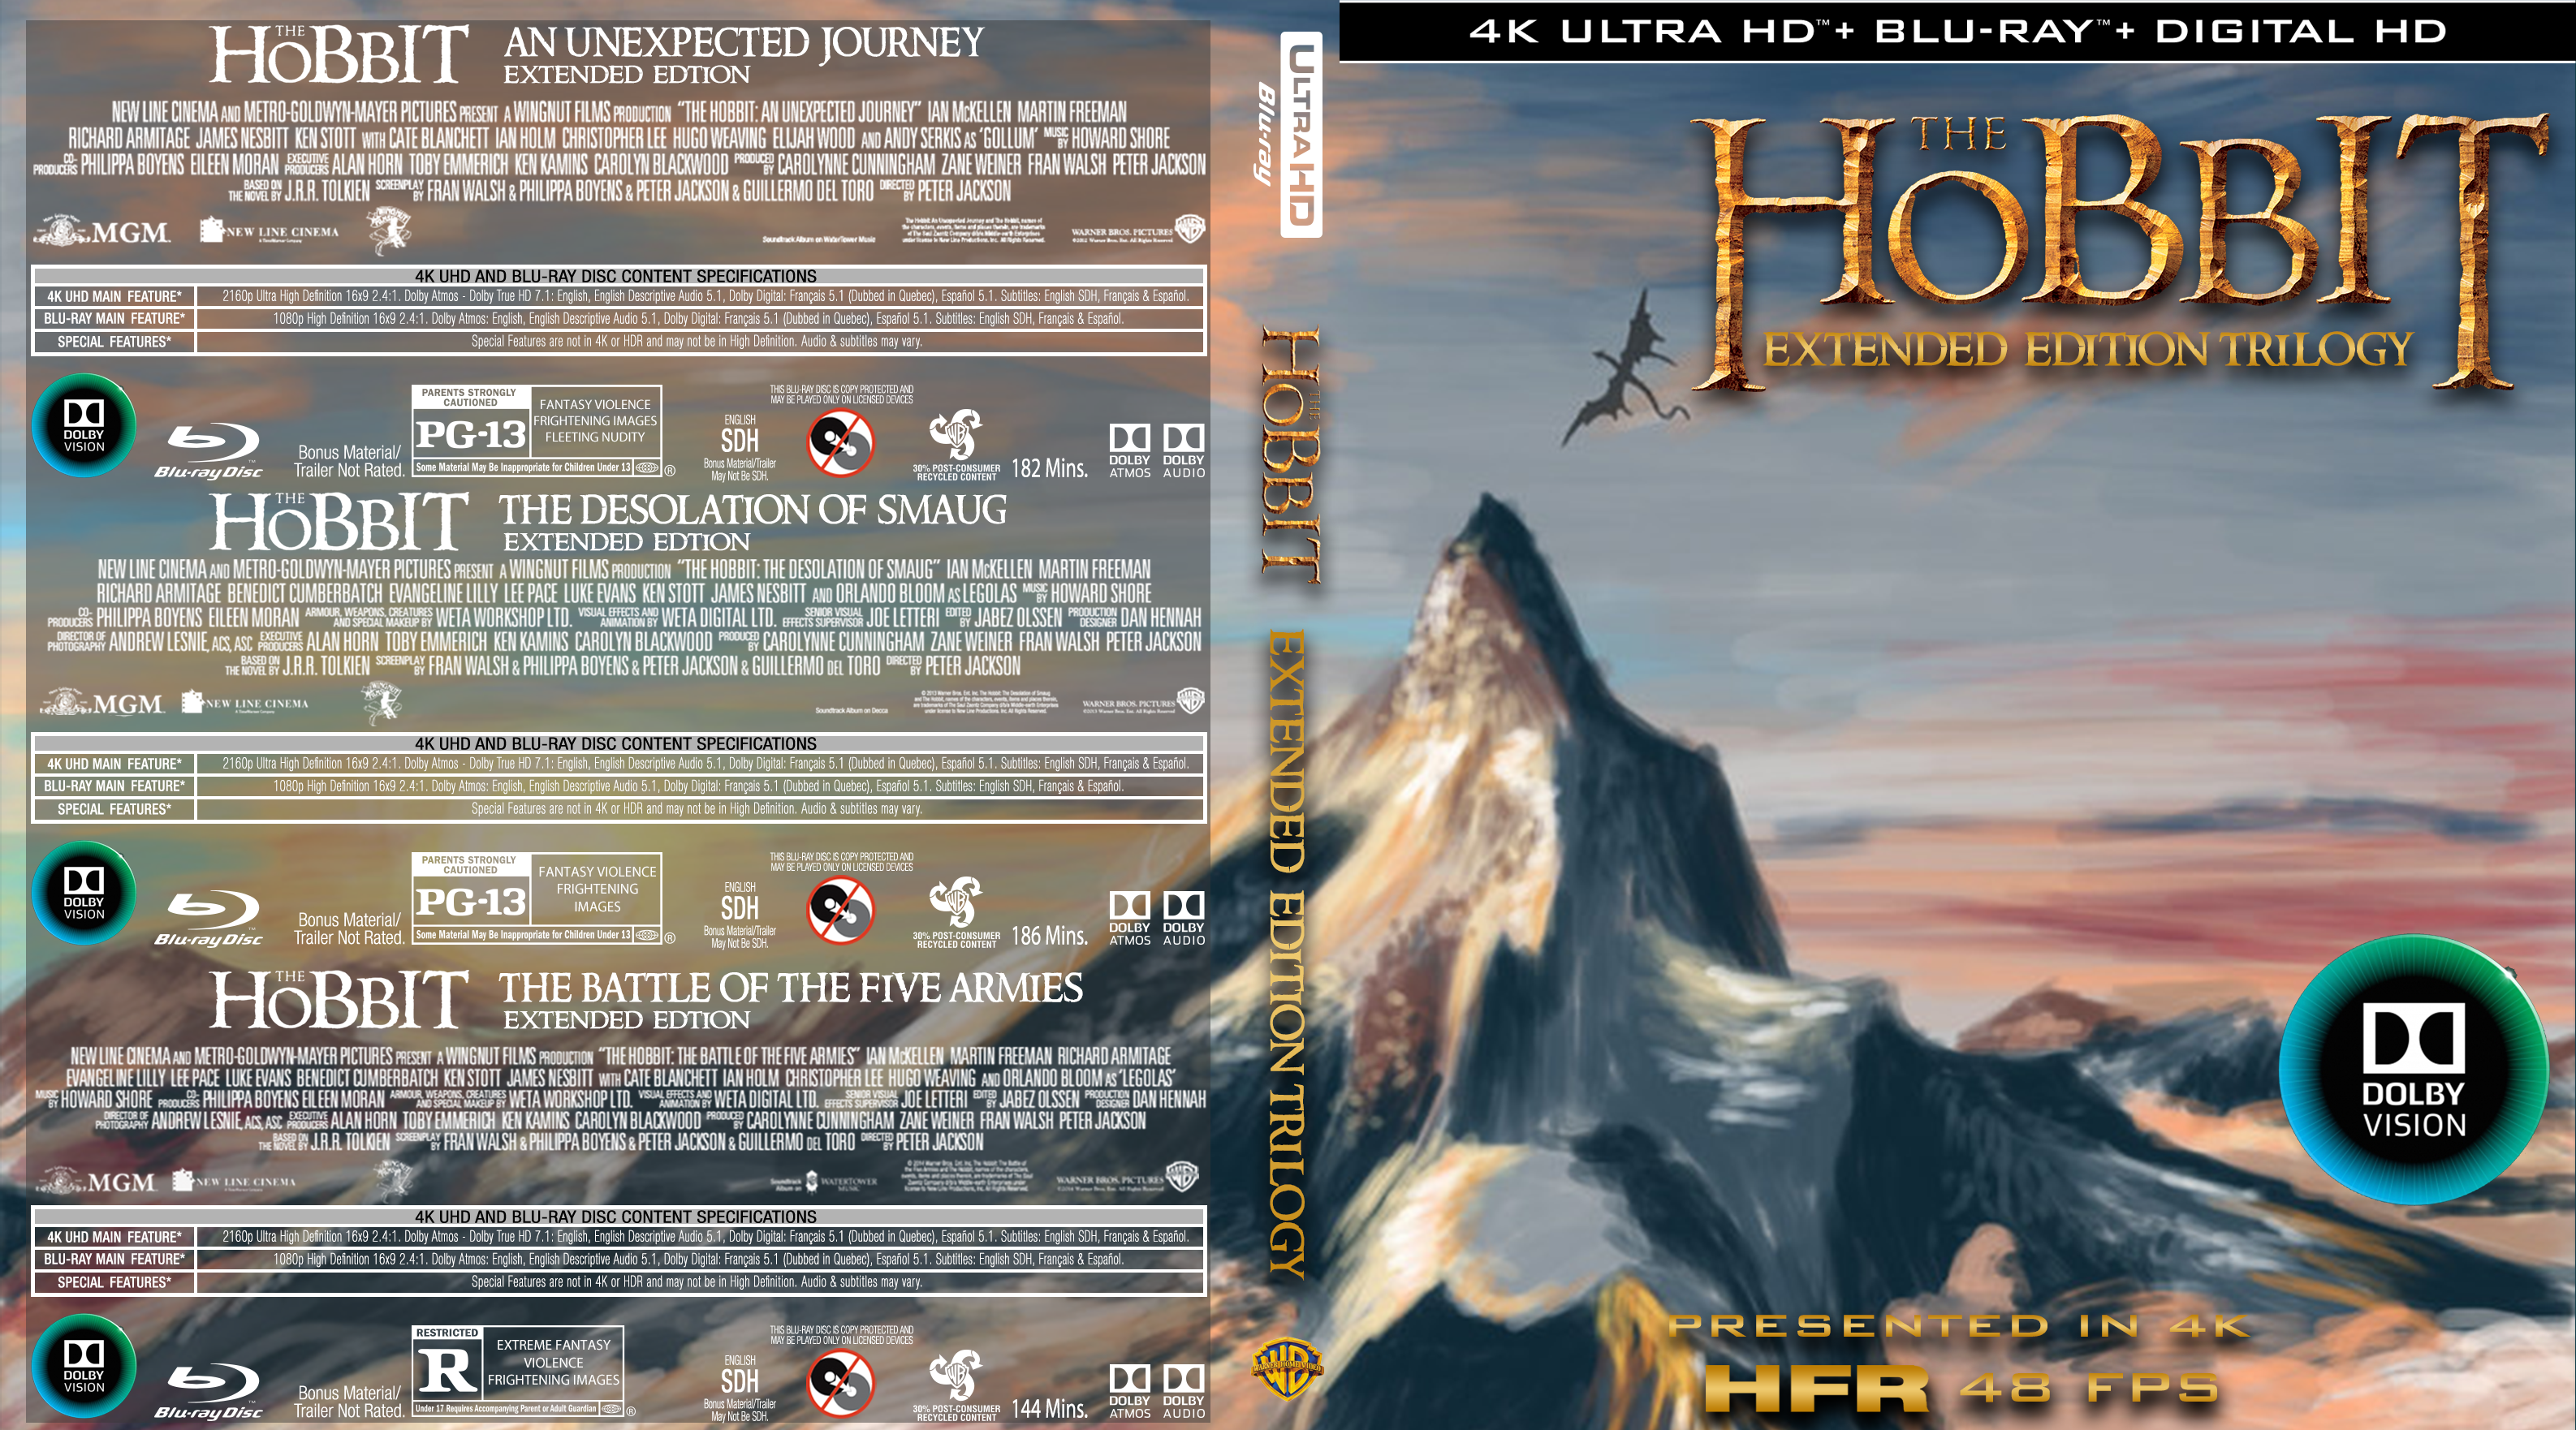 The Hobbit Extended Trilogy UHD HFR box cover